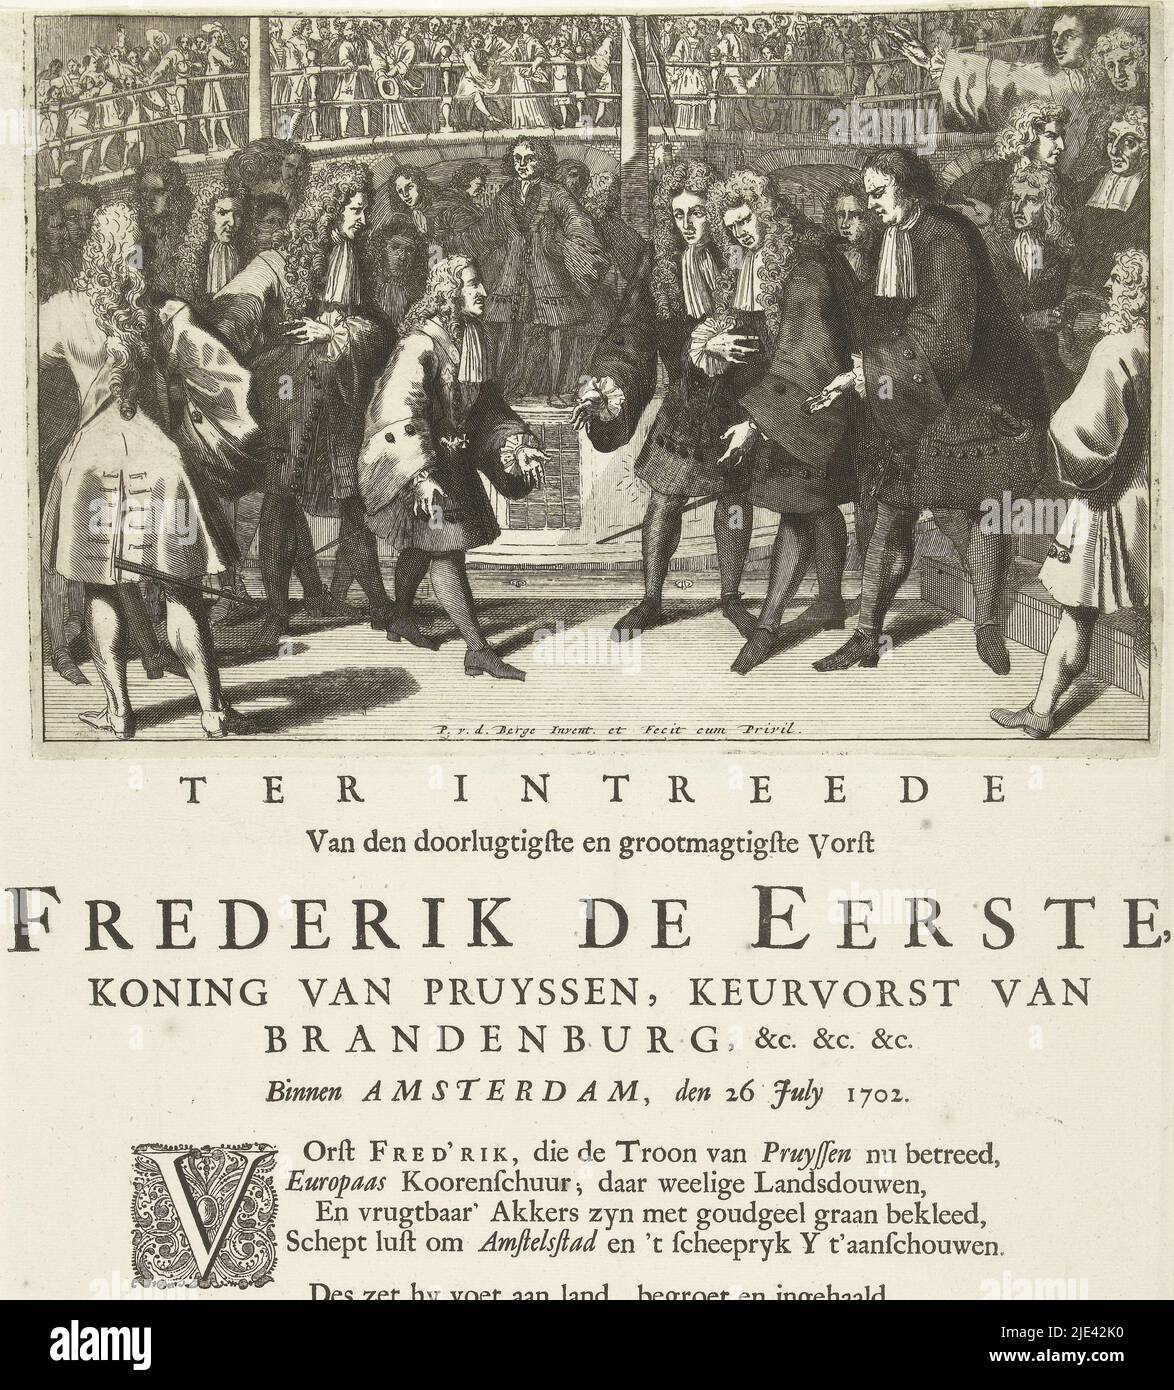 Visit of Frederick I of Prussia to Amsterdam, 1702, Pieter van den Berge, 1702, Visit of Frederick I king of Prussia to Amsterdam, July 26, 1702. The king is received on the deck of a barge in front of a bridge by the mayors De Roever, Witsen and Teylingen. On the sheet below the plate a verse., print maker: Pieter van den Berge, (mentioned on object), Pieter van den Berge, (mentioned on object), publisher: Pieter van den Berge, (mentioned on object), Amsterdam, 1702, paper, etching, engraving, letterpress printing, h 454 mm × w 313 mm Stock Photo